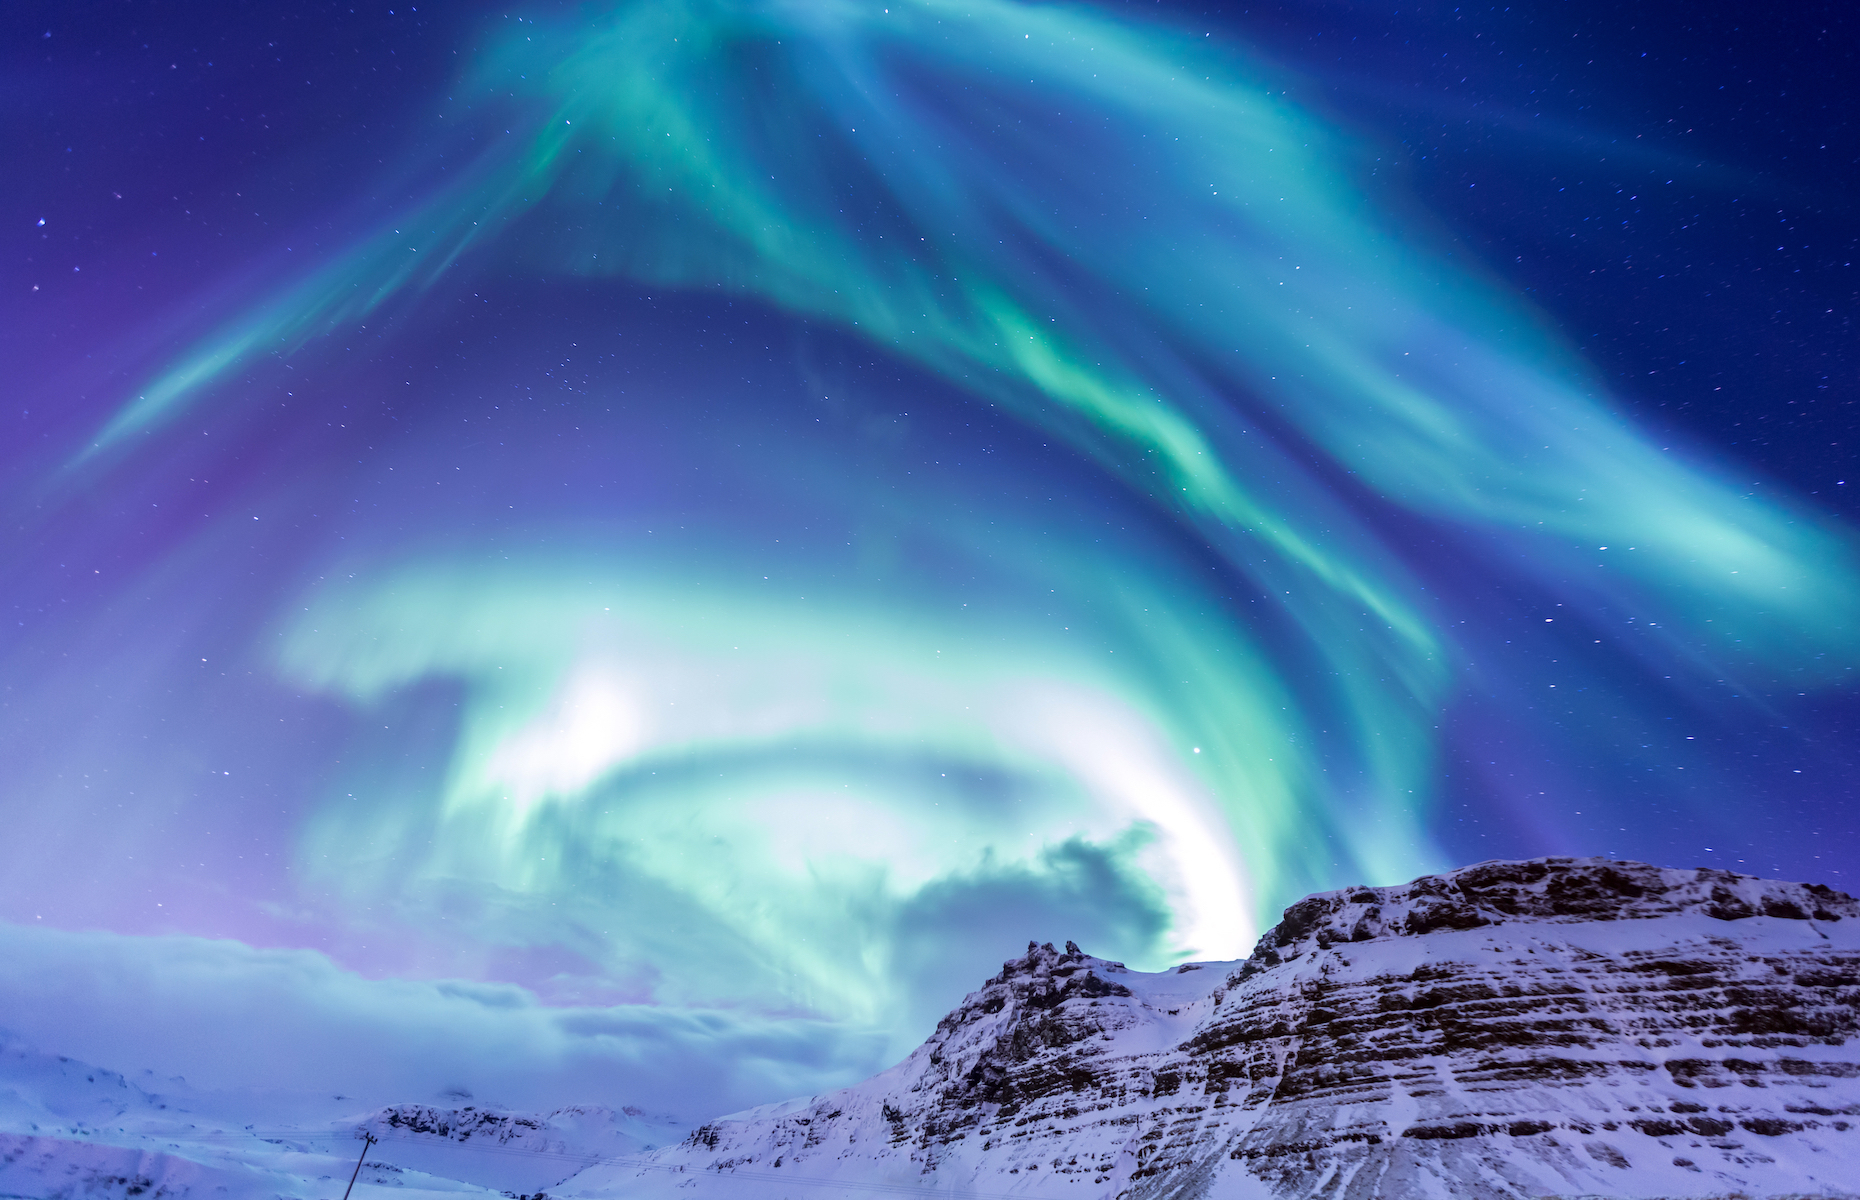 Auroras are most visible during the winter months.